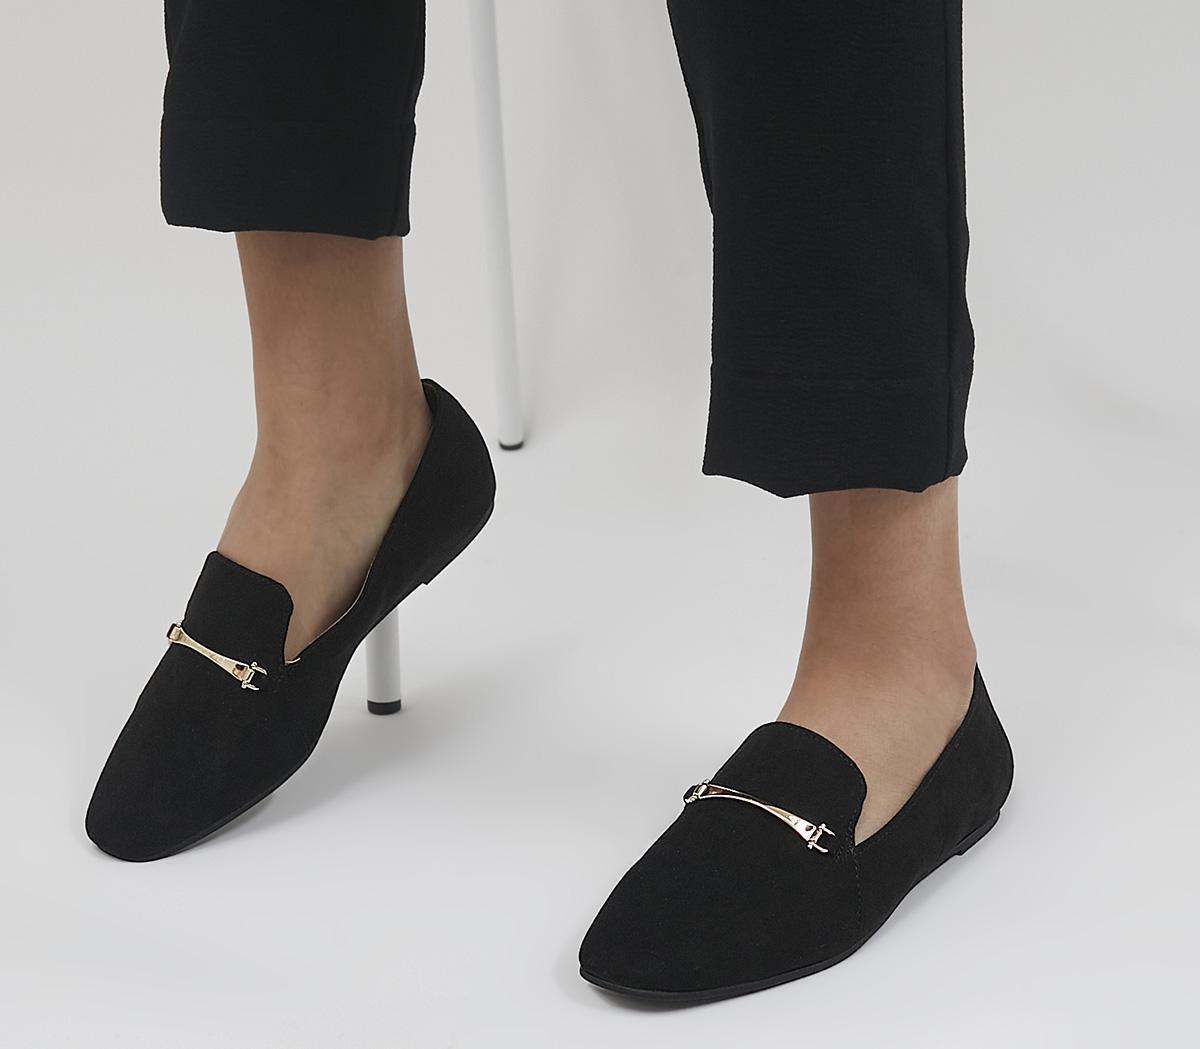 OfficeFrilled Feature Trim Slipper ShoesBlack With Gold Hardware